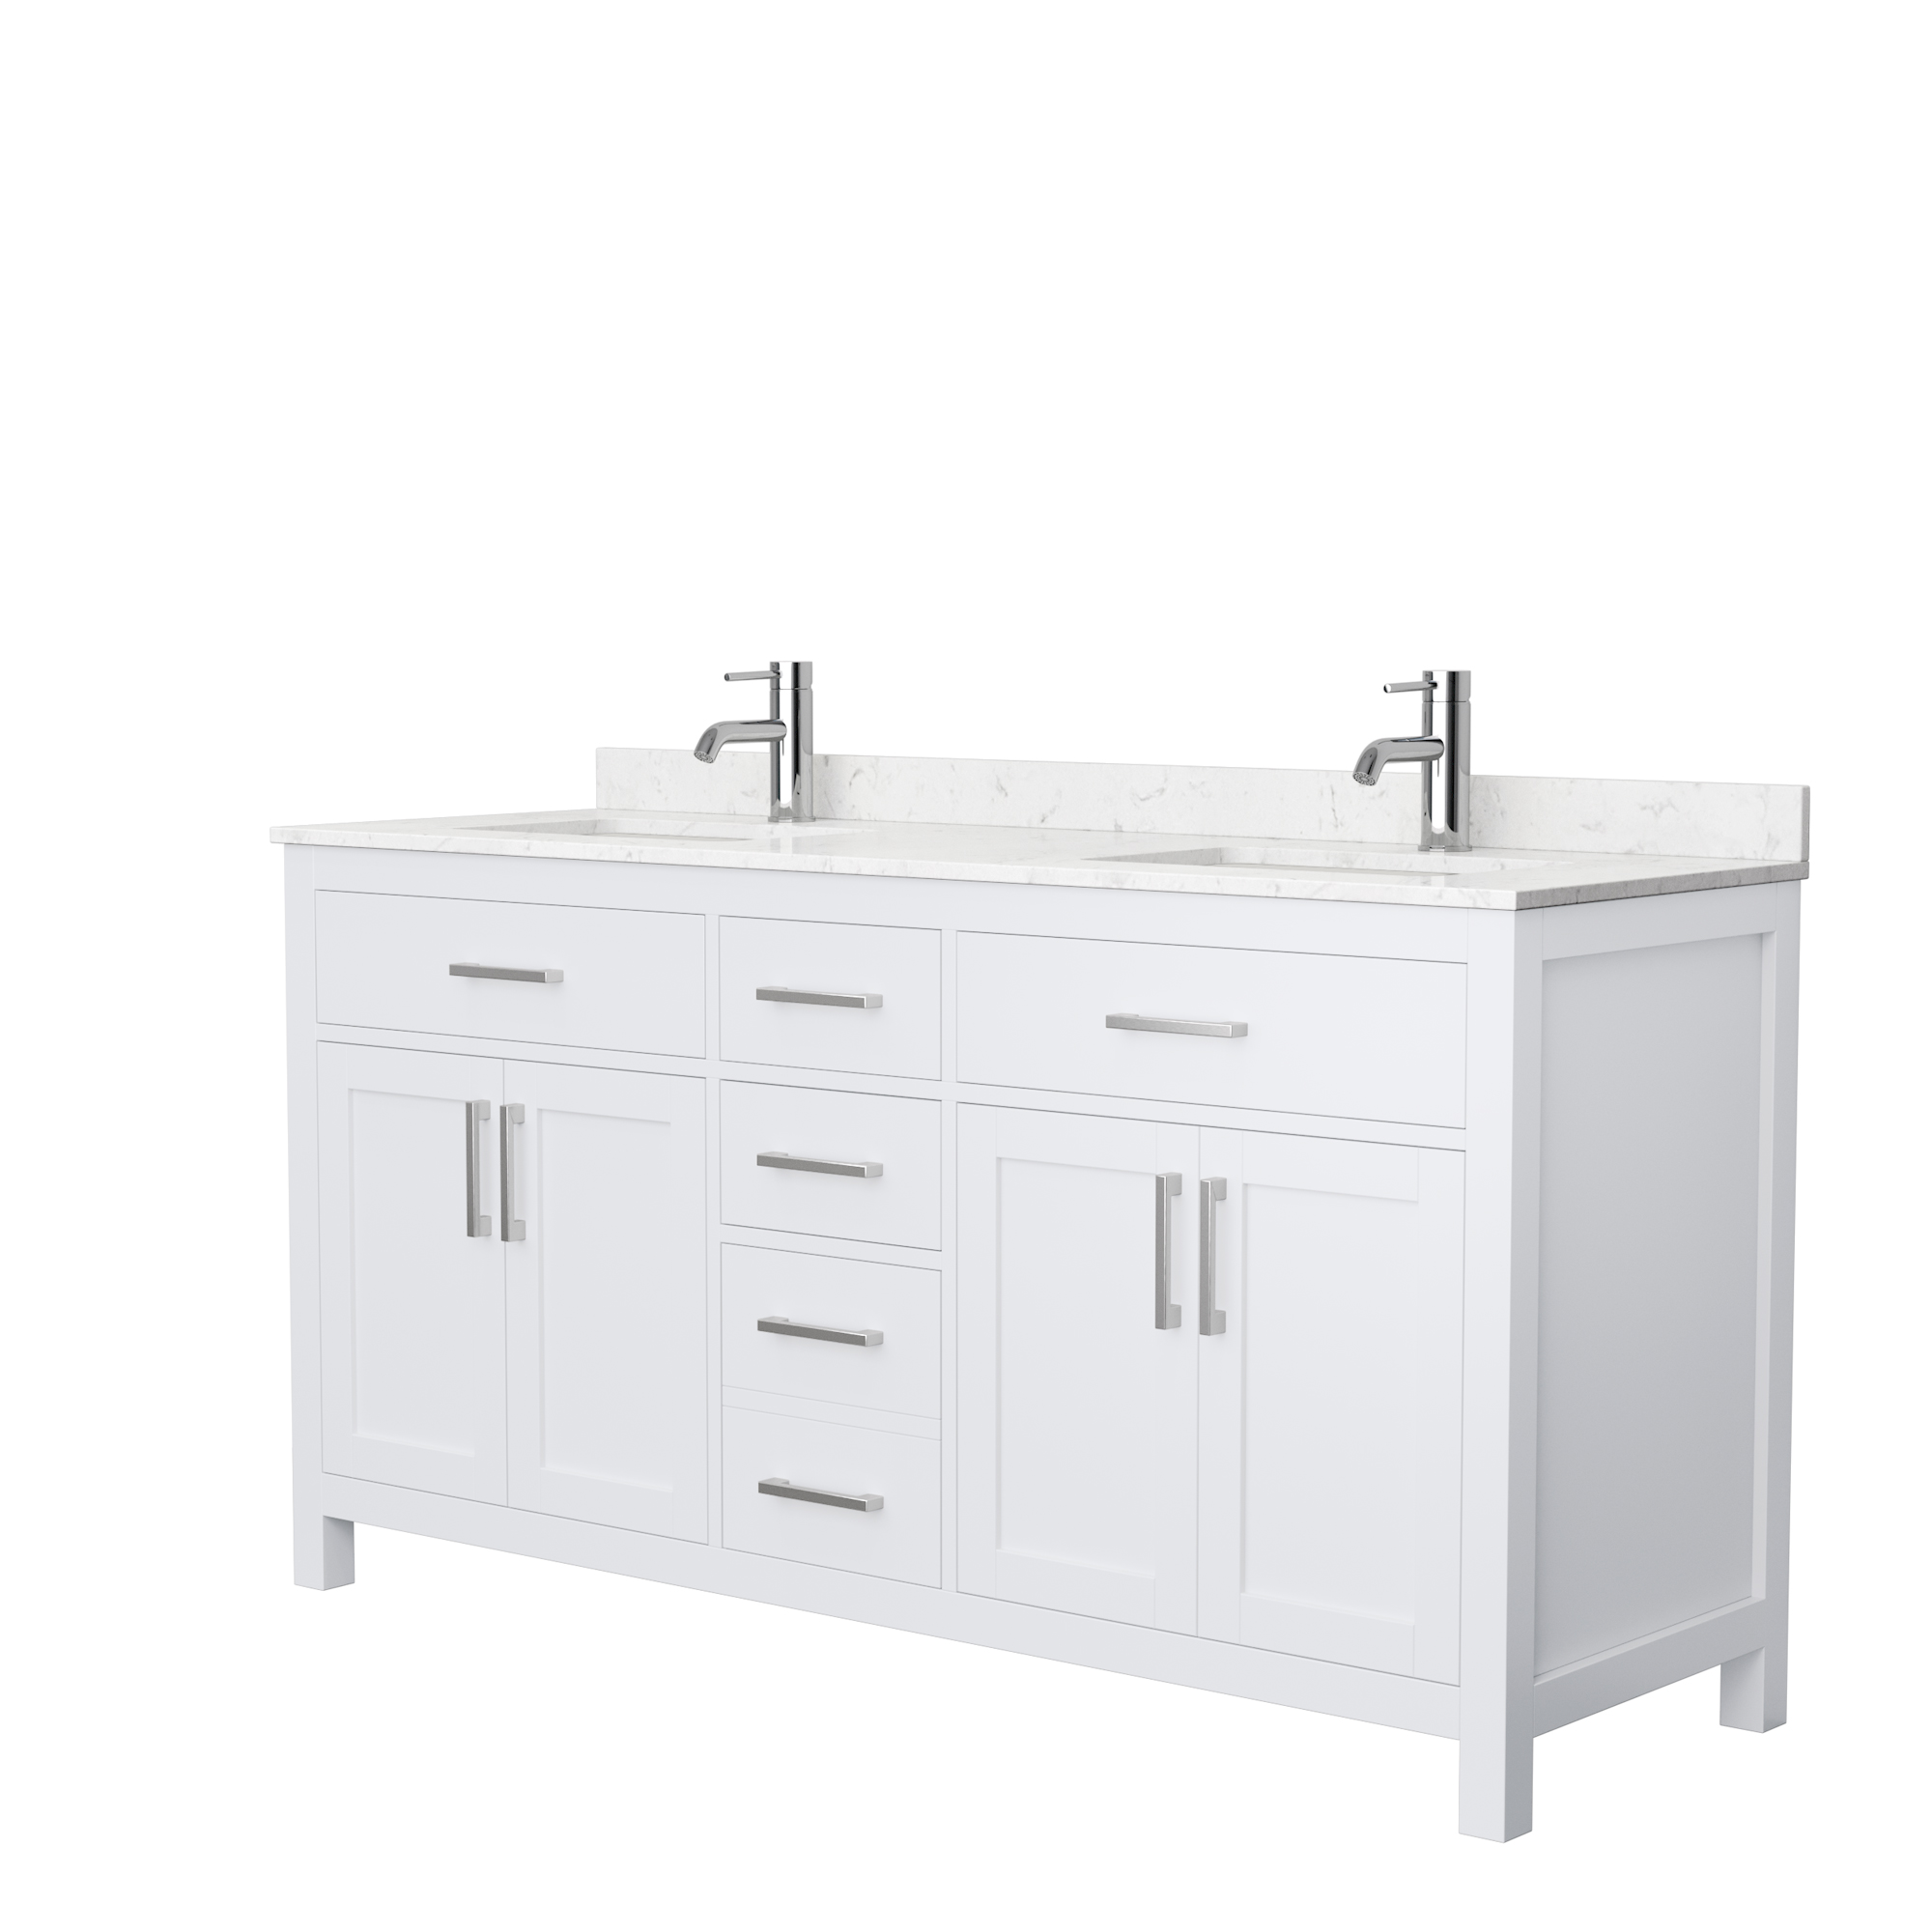 Beckett 66 Double Bathroom Vanity - White  Beautiful bathroom furniture  for every home - Wyndham Collection